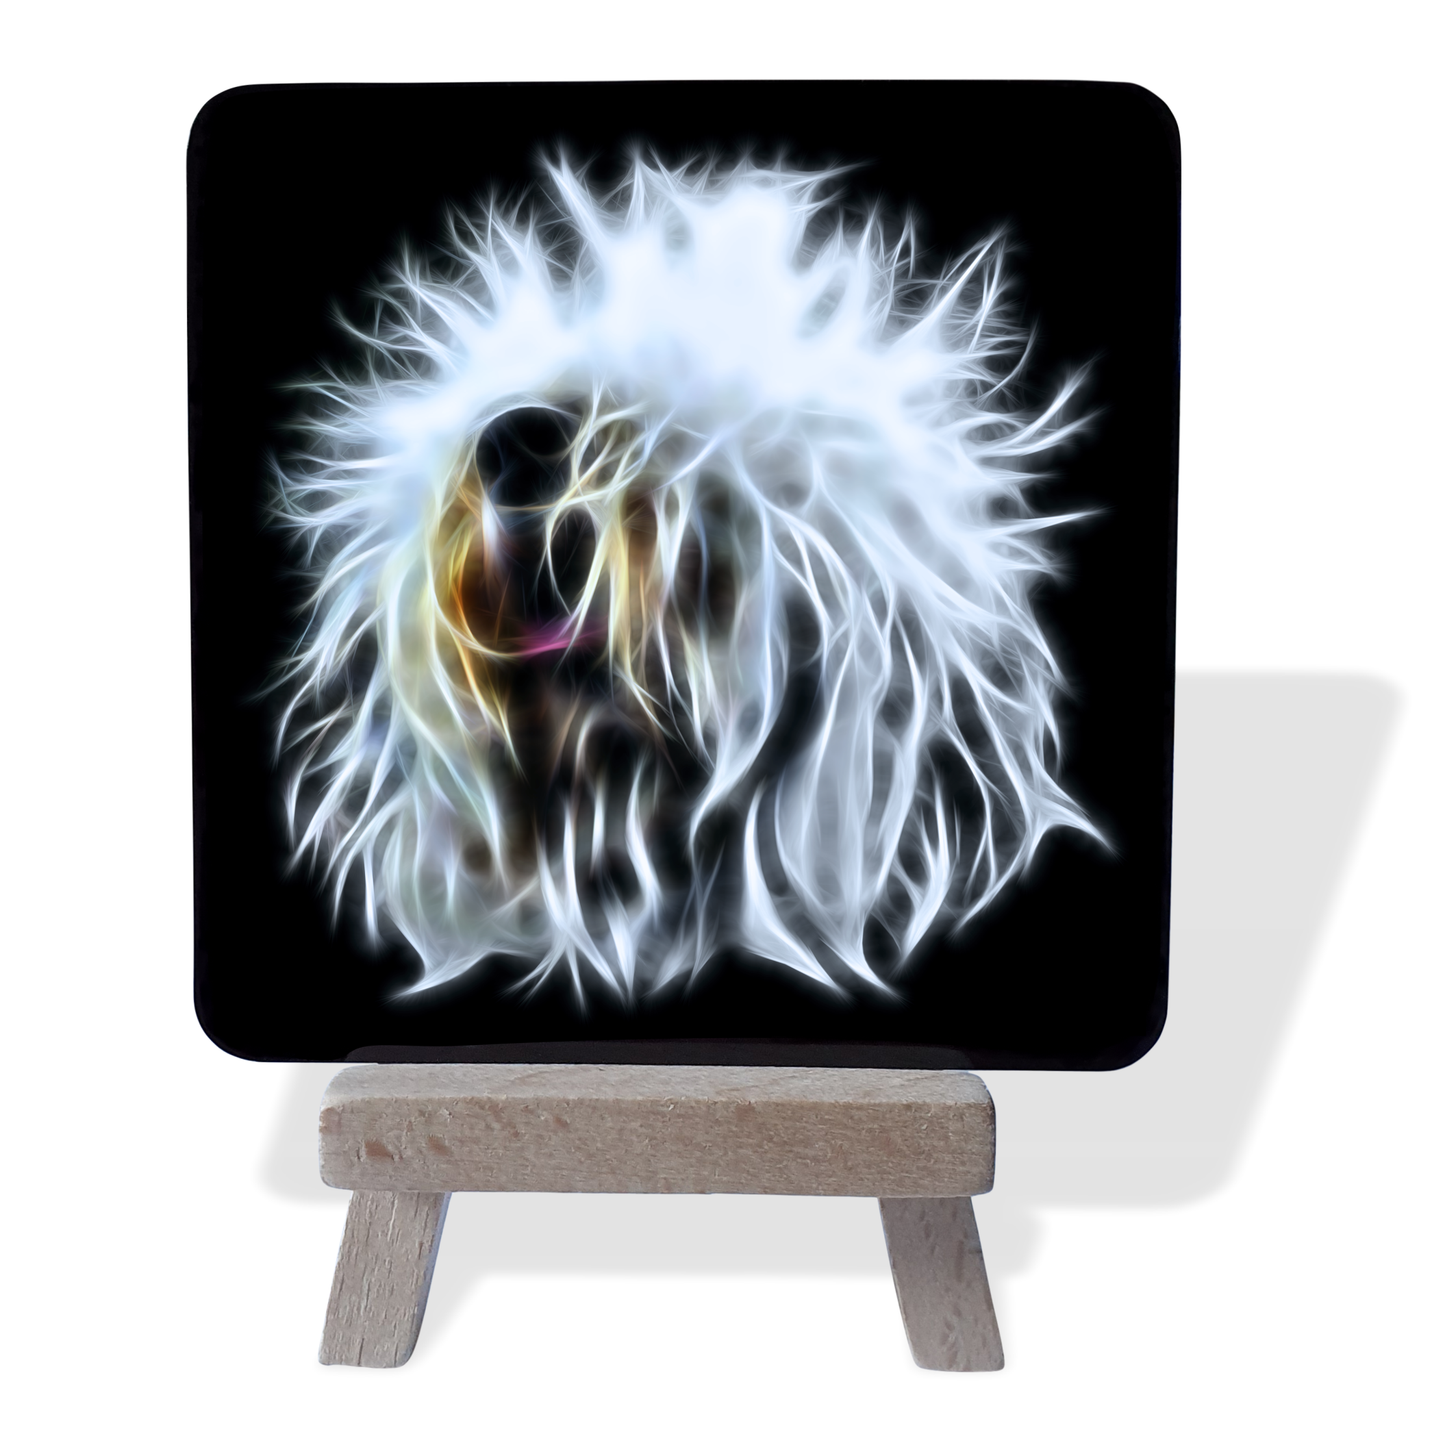 Old English Sheepdog Metal Plaque and Mini Easel with Fractal Art Design #1